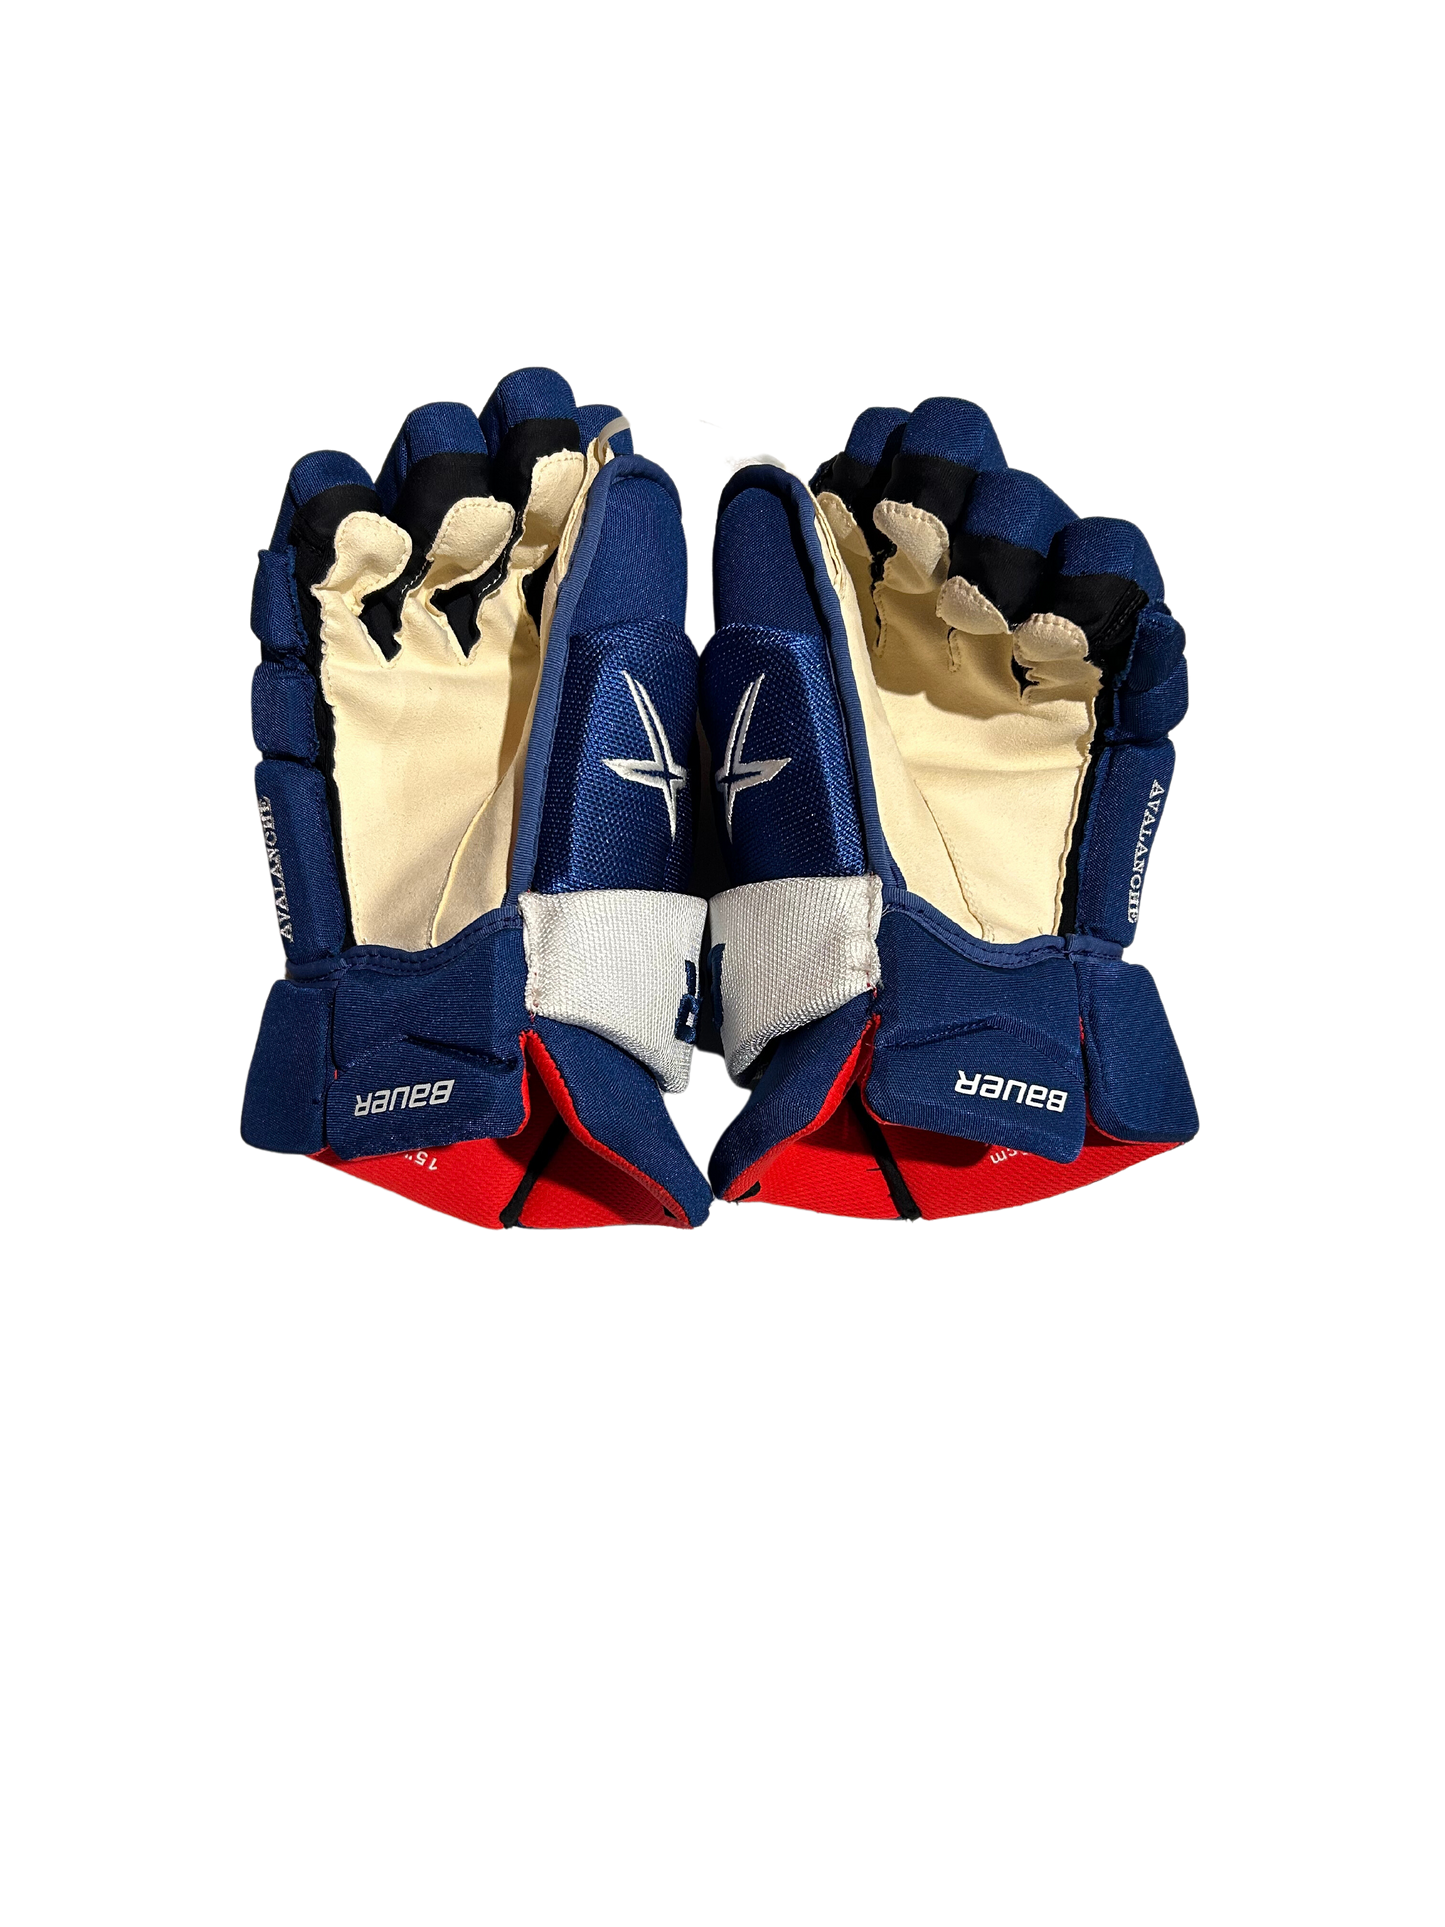 New Team Issued Blue Colorado Avalanche 15" Bauer Vapor X Gloves (Extended Cuff)